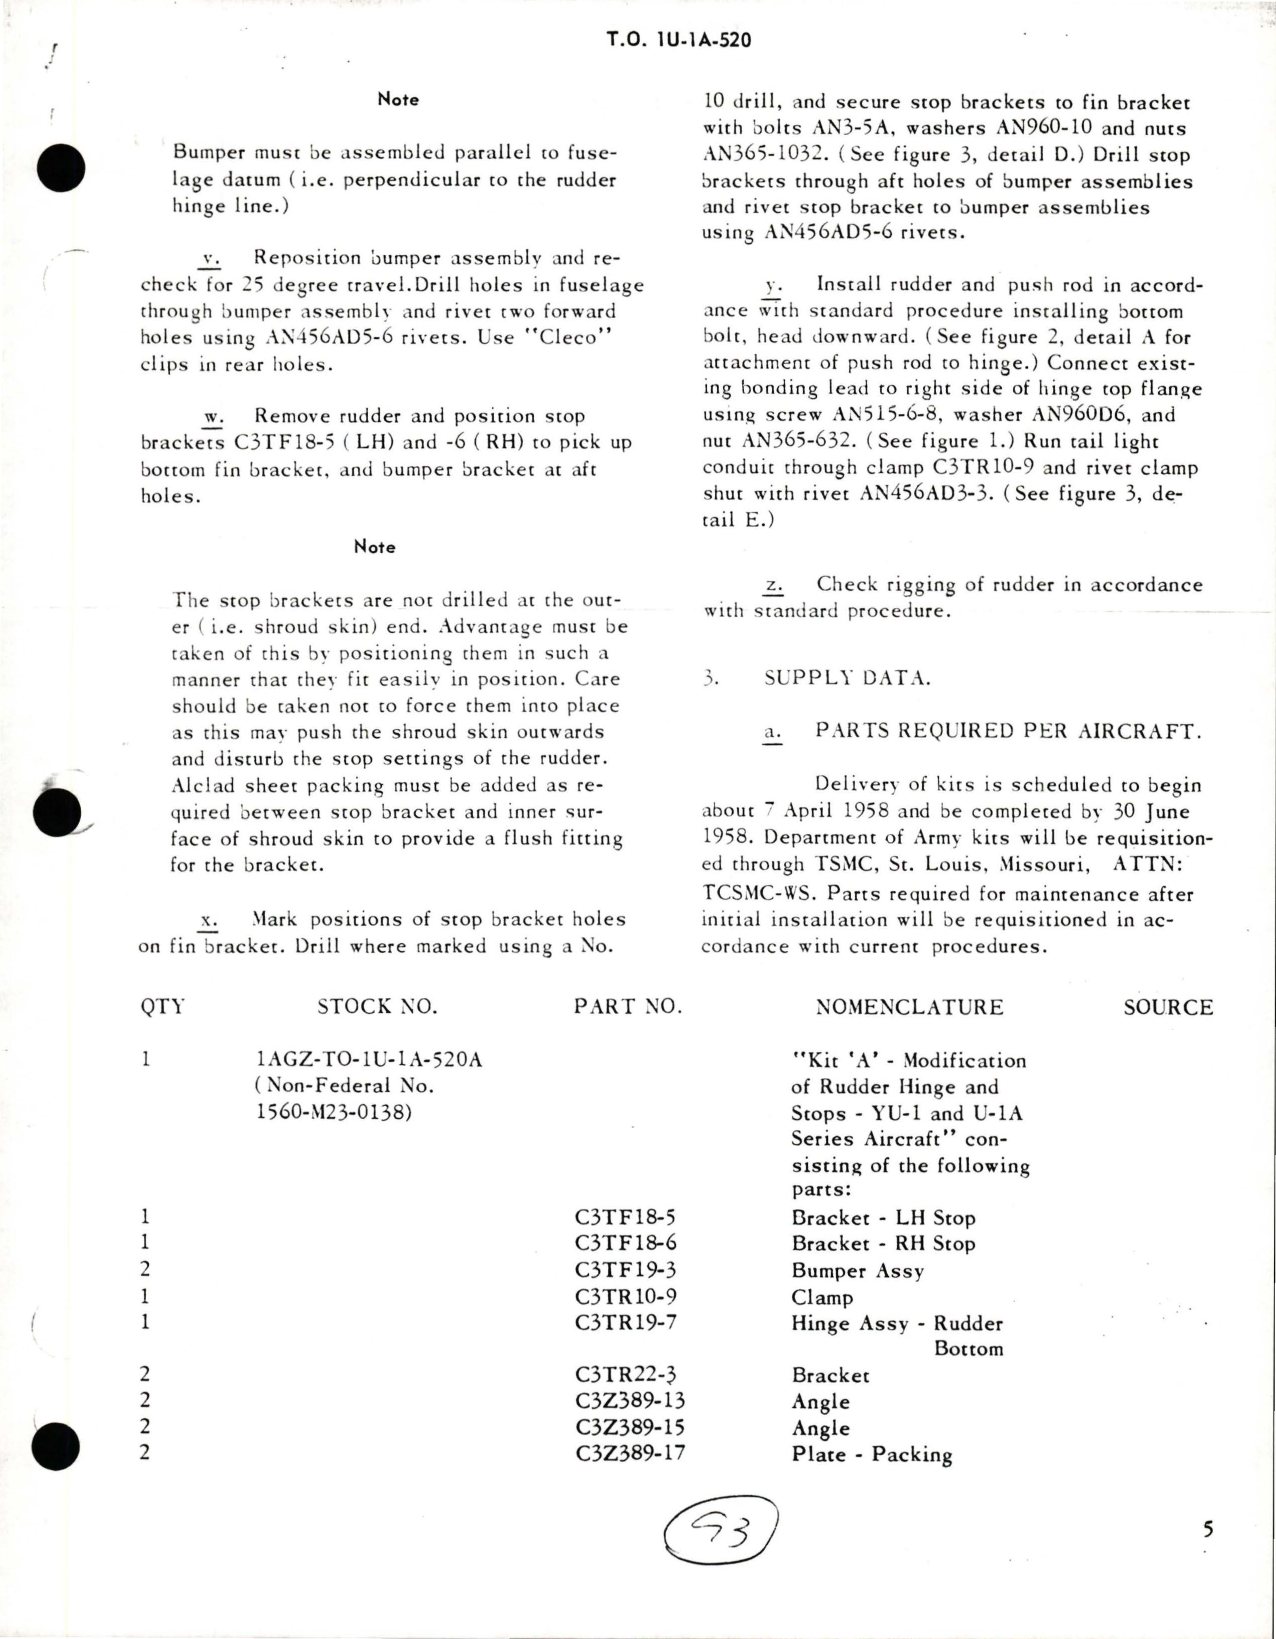 Sample page 7 from AirCorps Library document: Modification of Rudder Hinge & Stops on YU-1 and U-1A